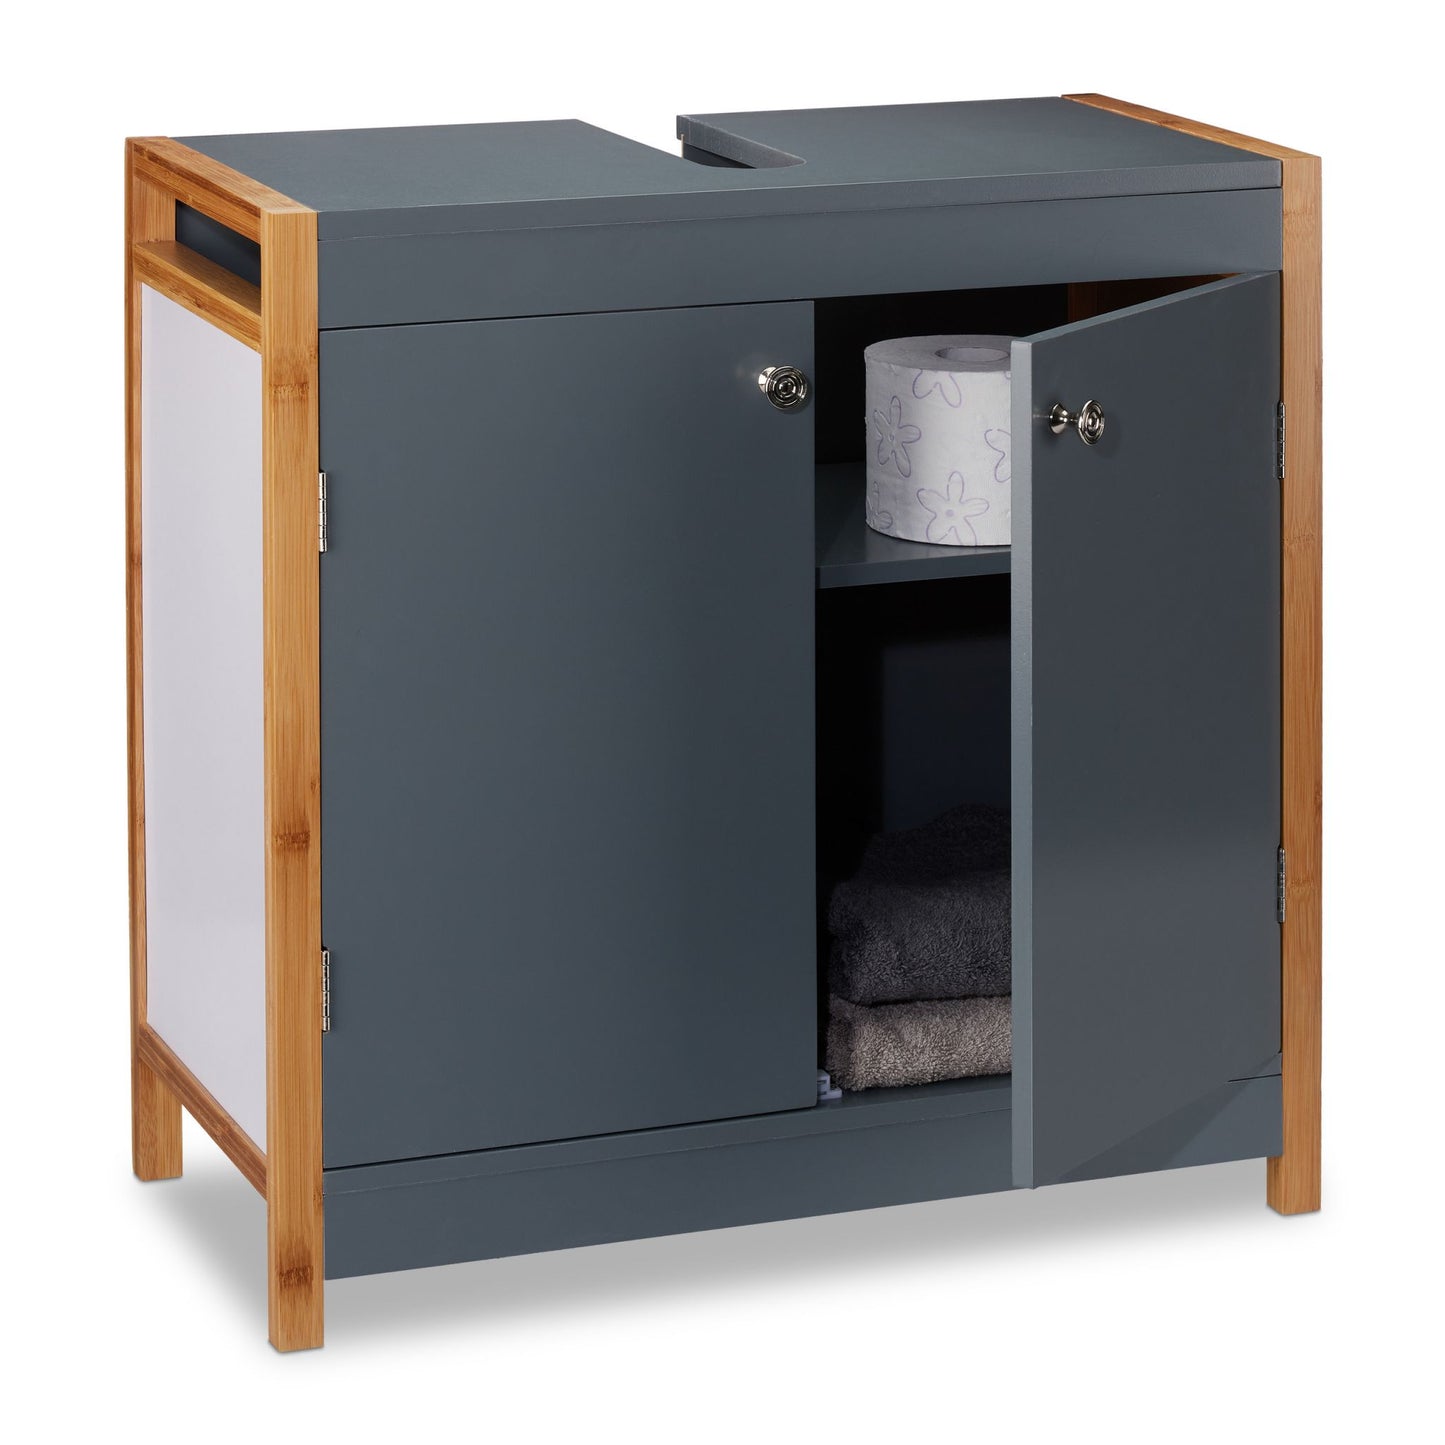 RelaxDays Basin Floor Cabinet with Bamboo Frame Bamboo Bathrooms